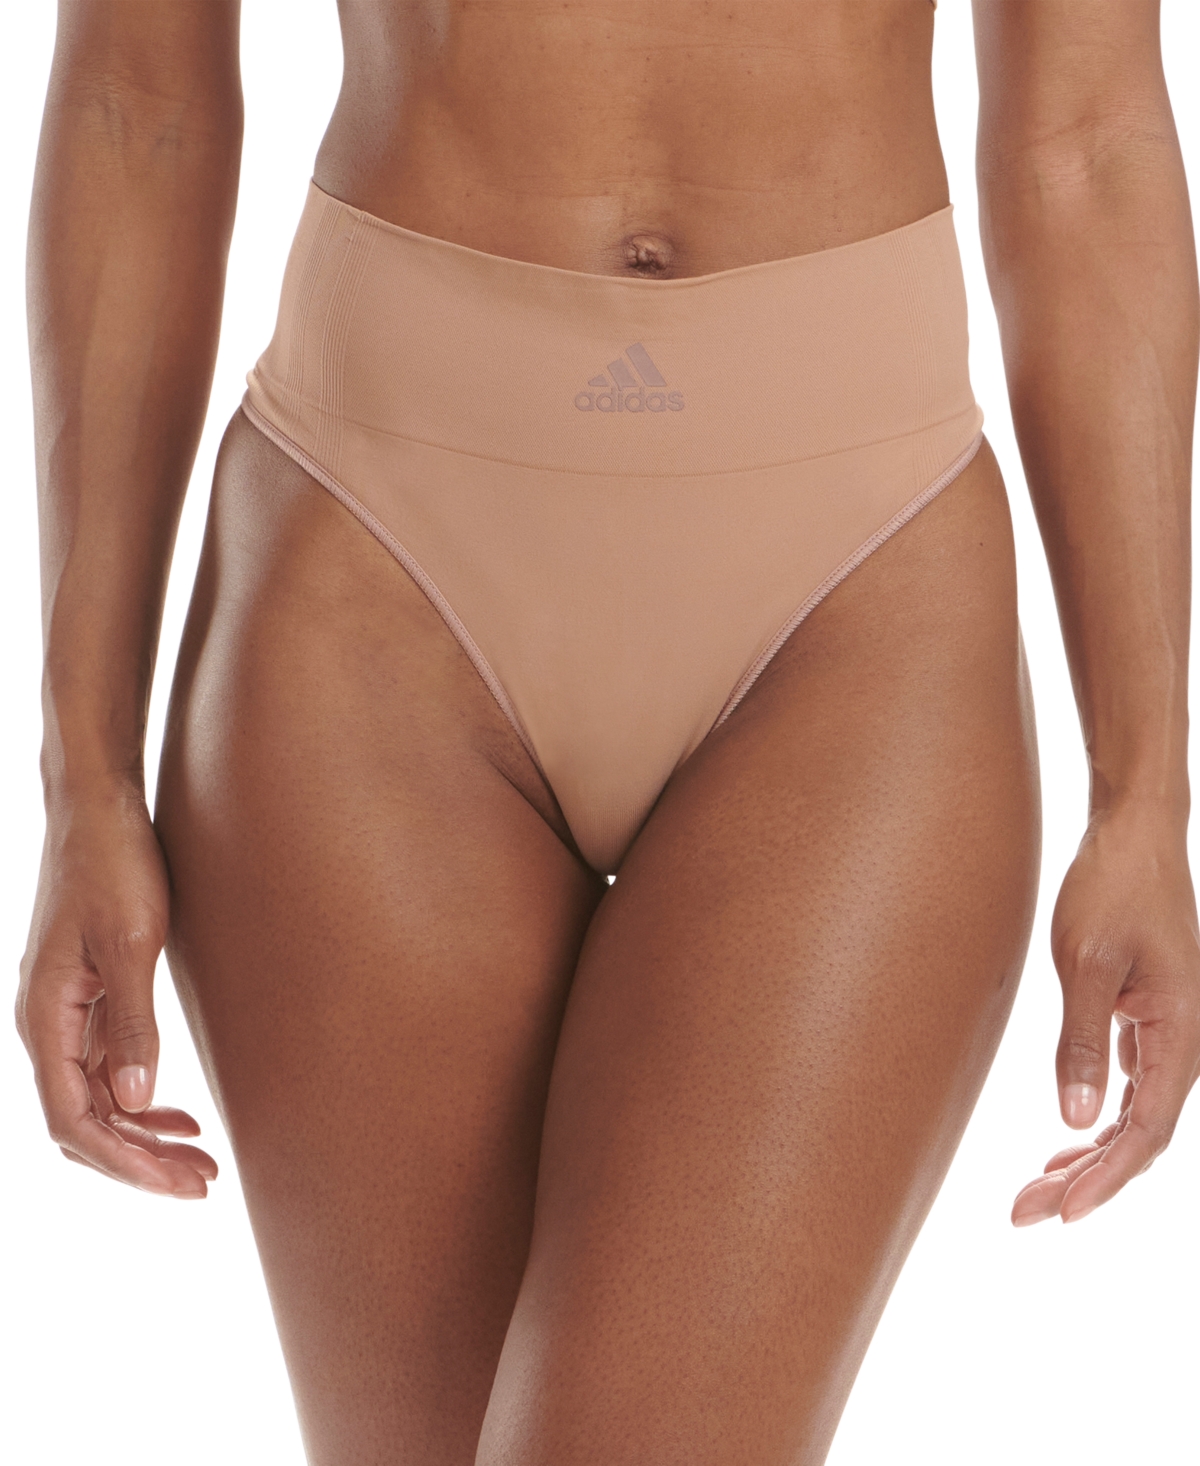 Adidas Originals Intimates Women's Active Seamless Micro Stretch High Waist Thong Underwear 4a1h01 In Toasted Almond